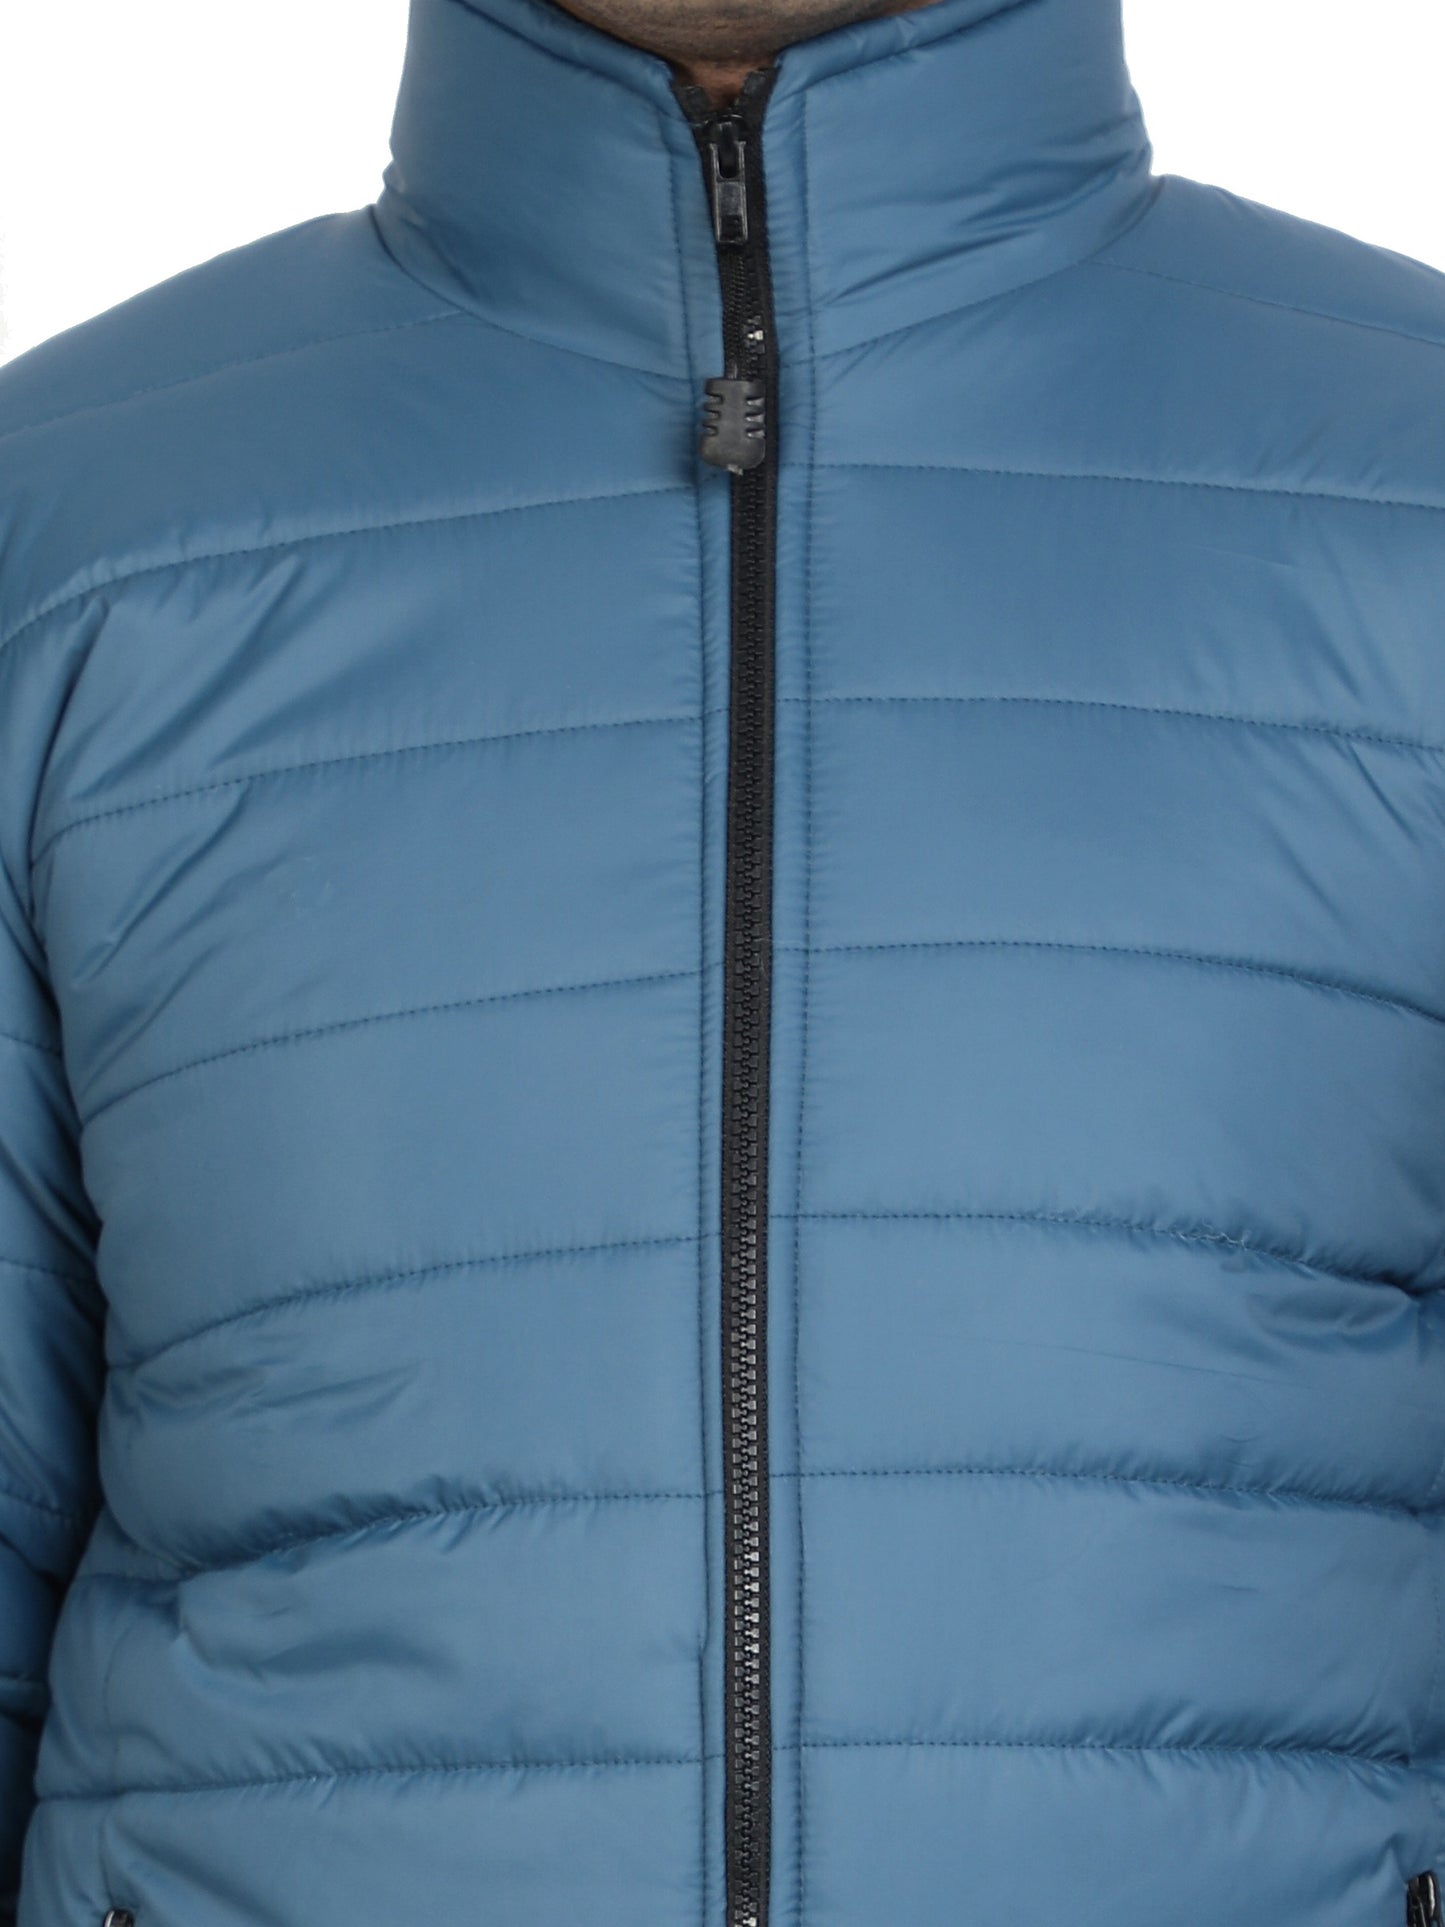 NUEVOSPORTA Men's Winter Solid Teal Quilted Puffer jacket